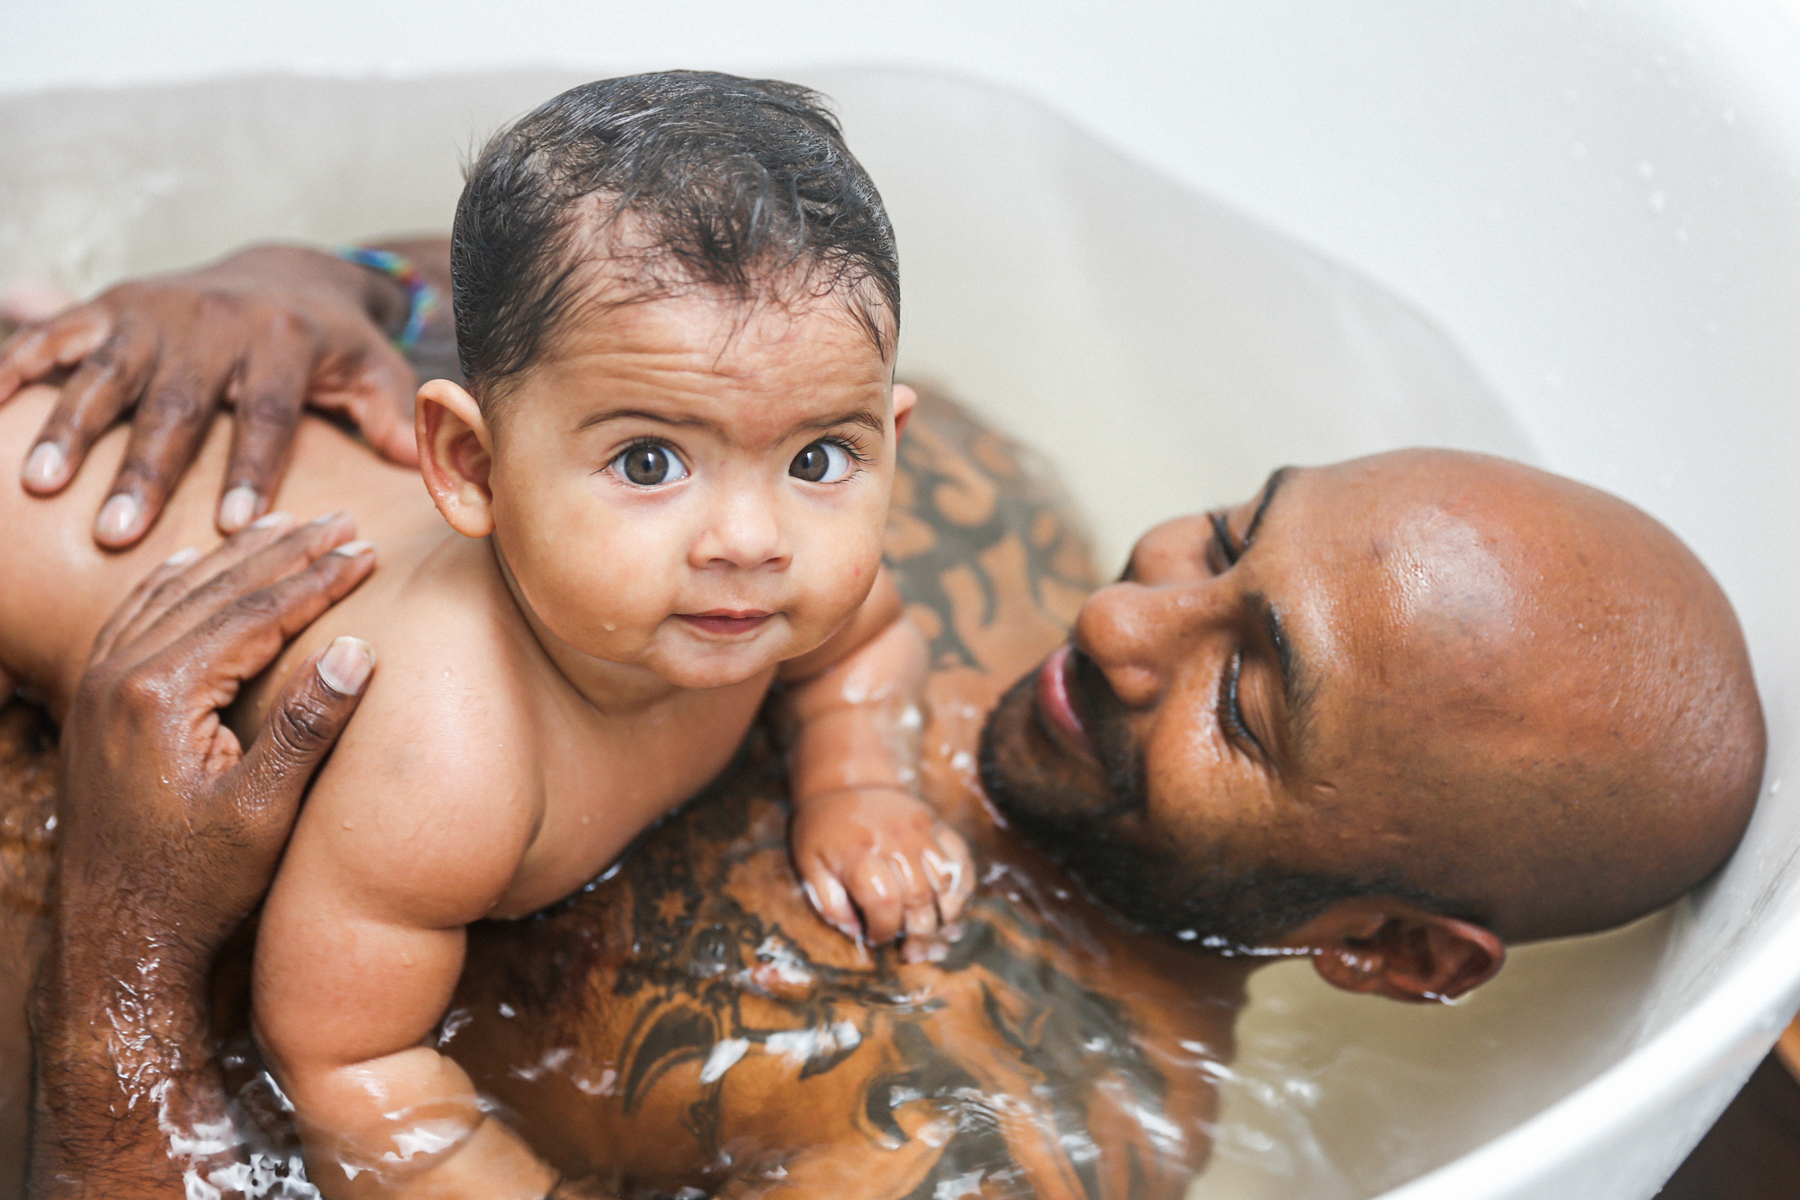 A photo of father Prema in the bath; he is laying down and holding his child on his chest who is looking directly into the camera